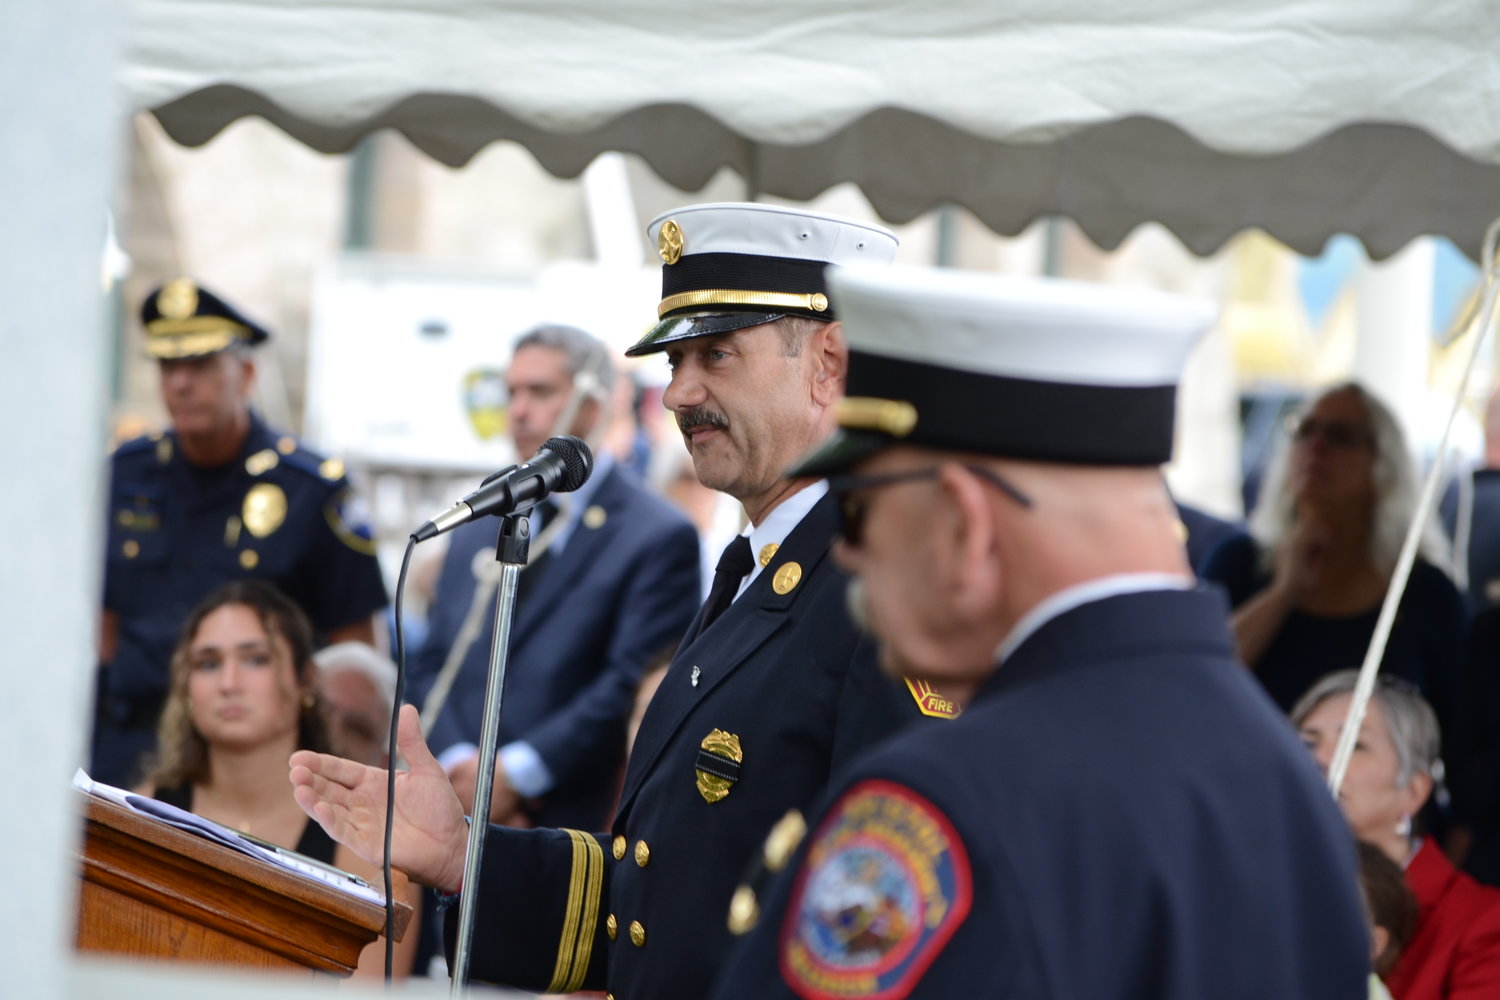 Firefighter Dave Cairrao provided remarks on behalf of the department.